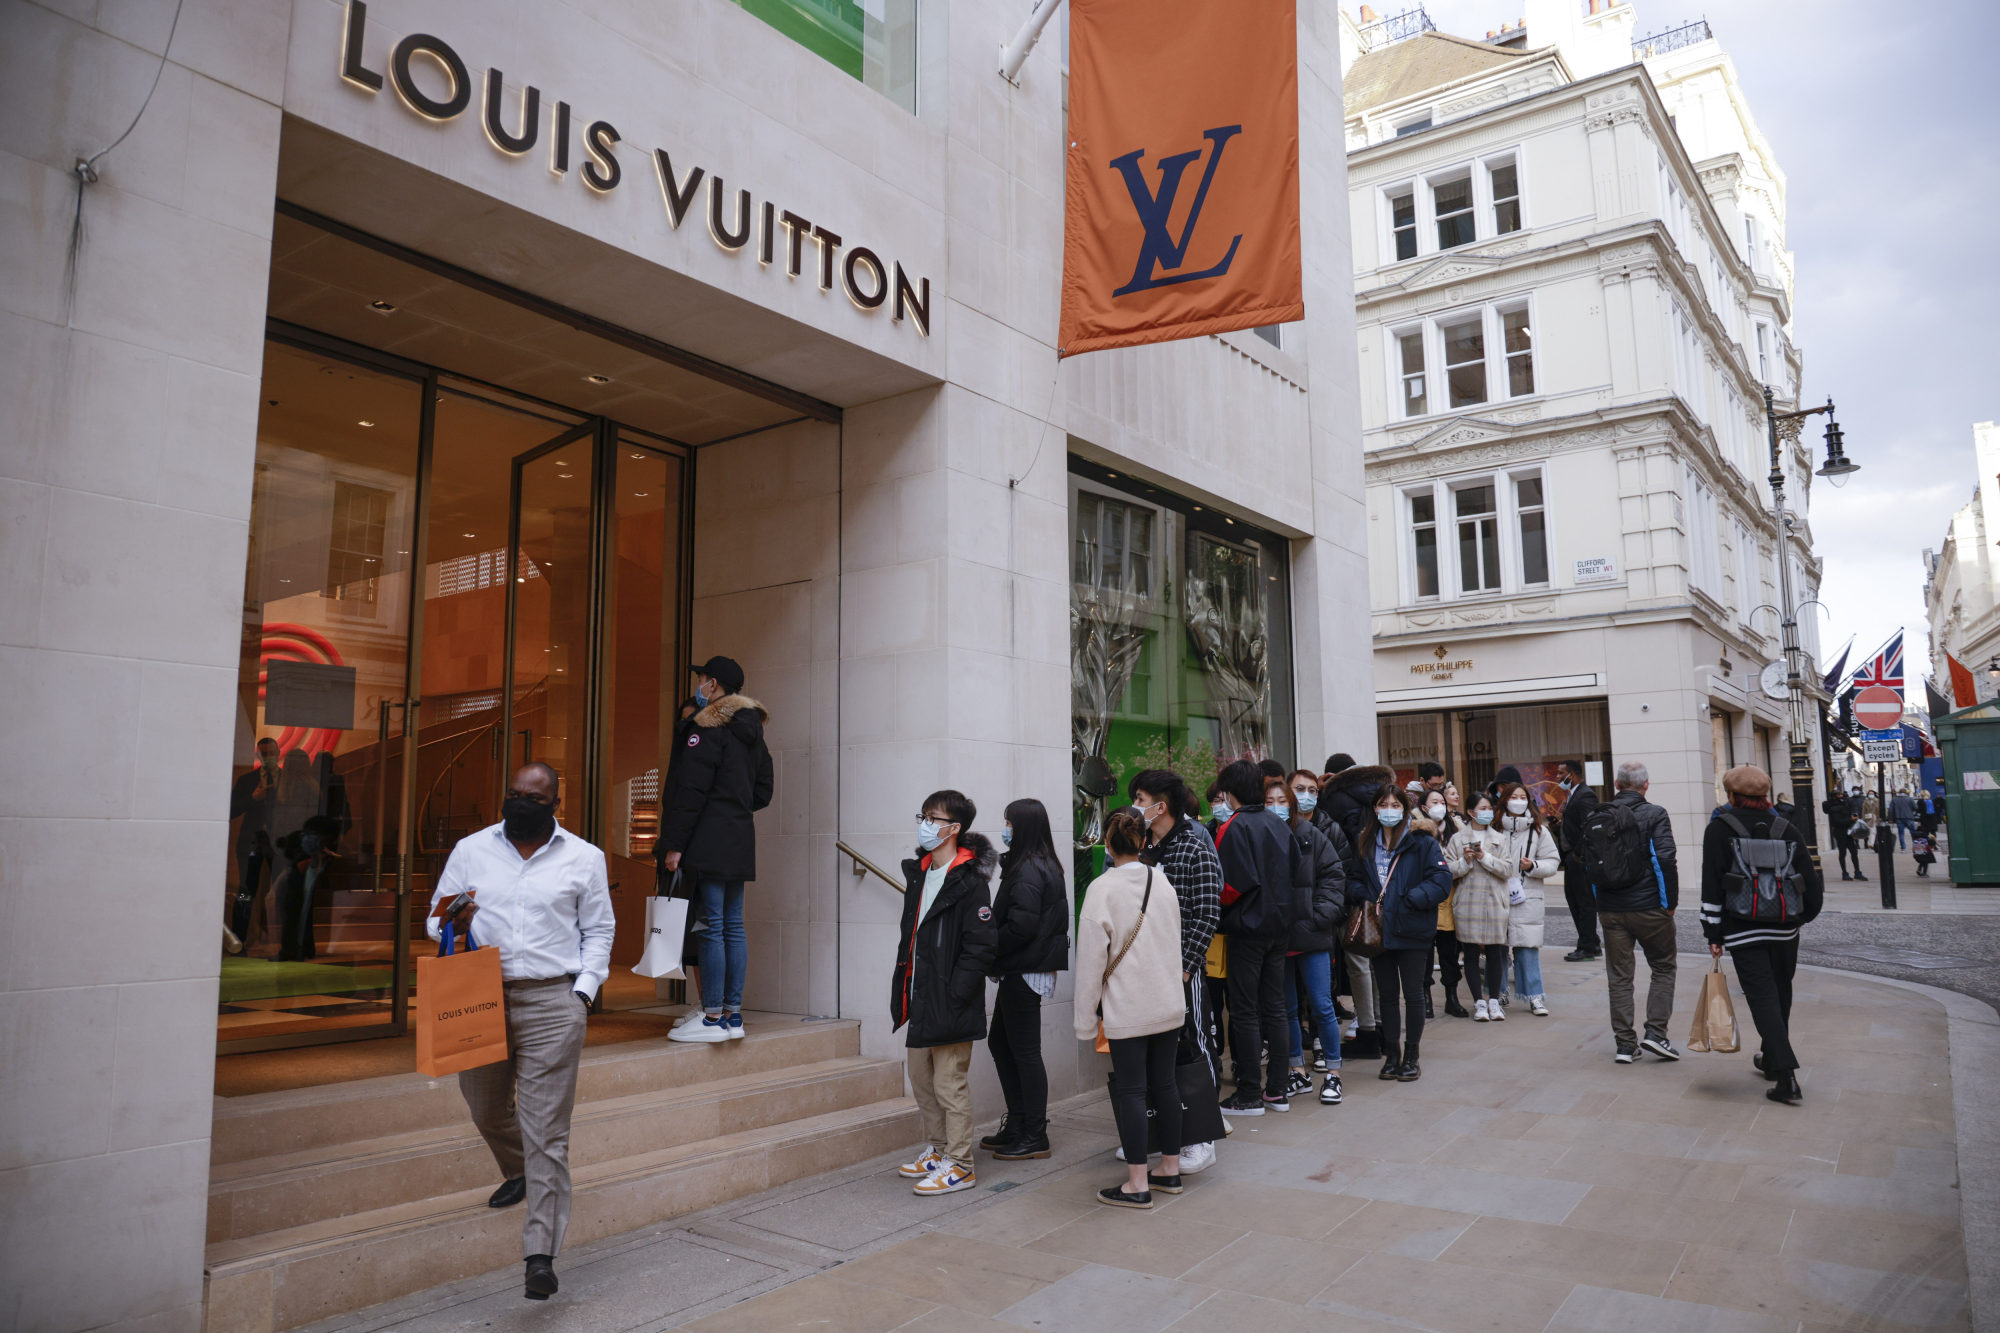 People in line waiting to enter the Louis Vuitton store, Paris